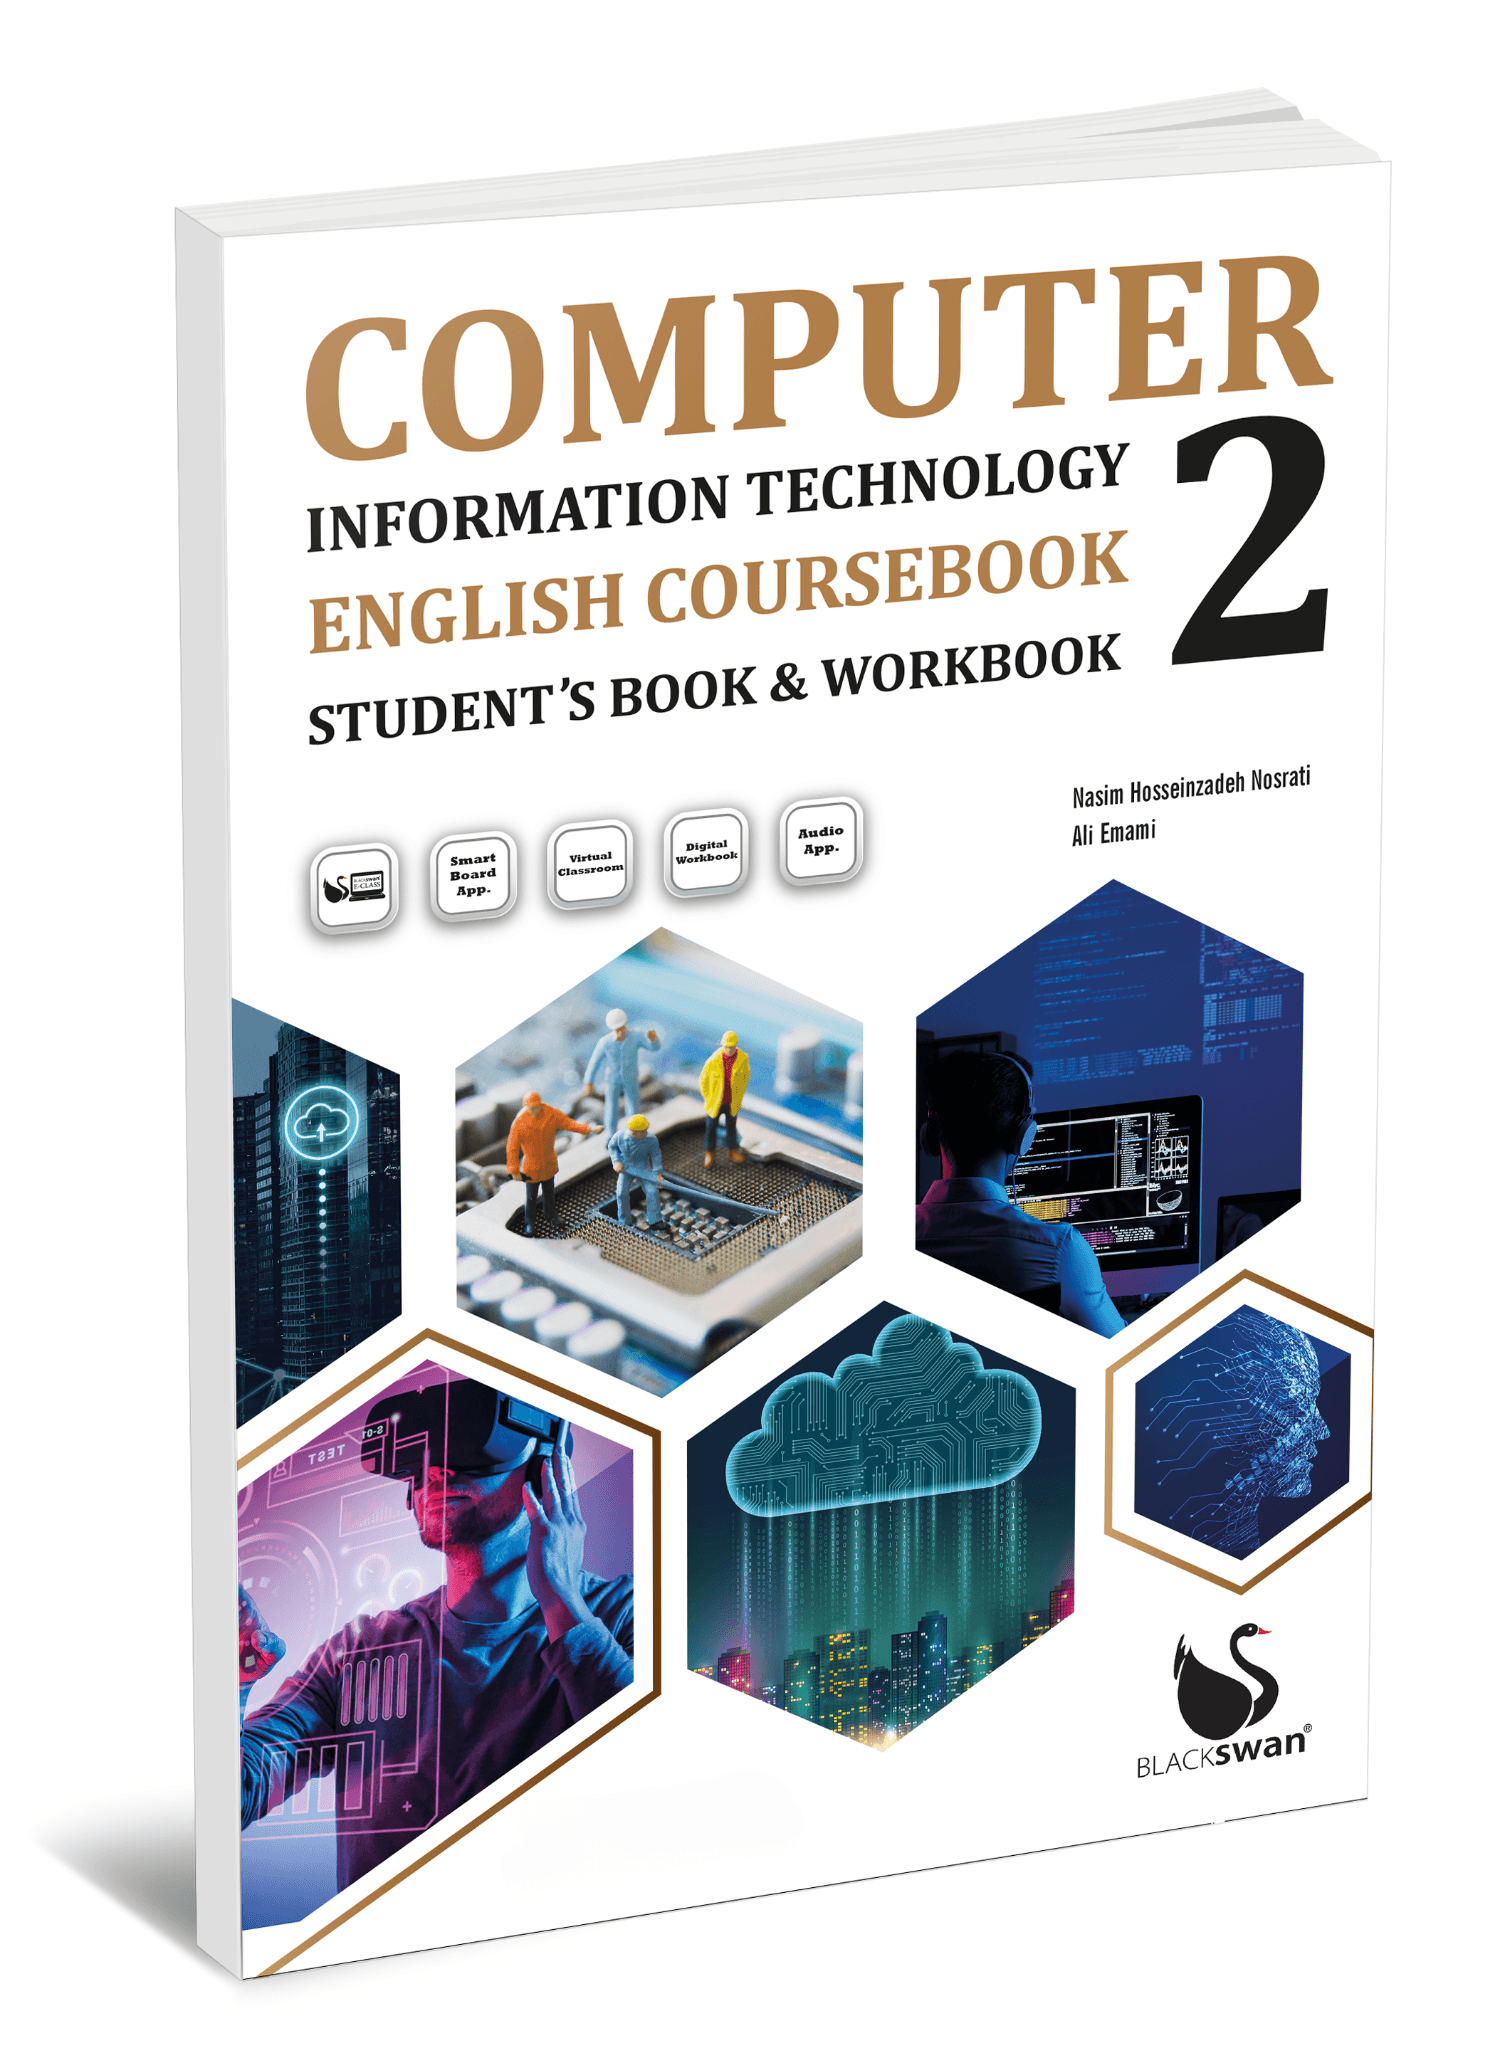 Computer and Information Technology 2 Student's Book & Workbook